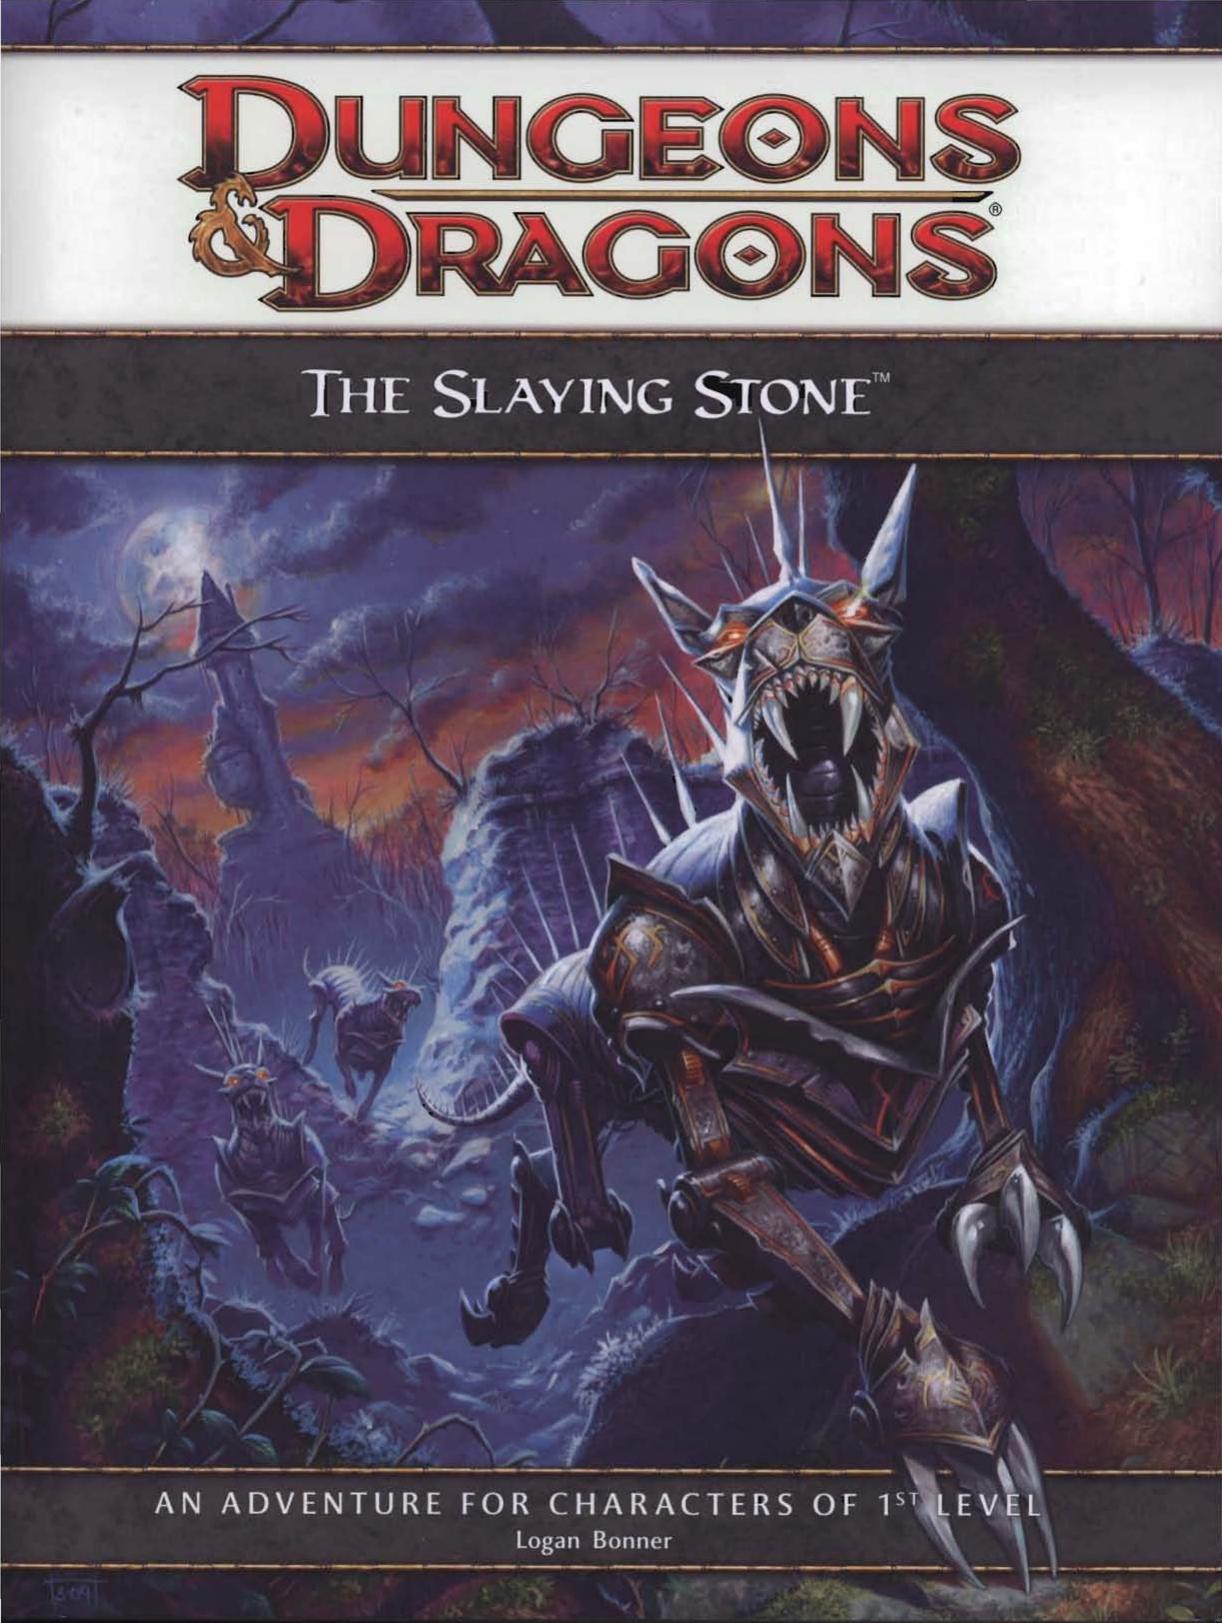 The Slaying Stone: Adventure HS1 for 4th Edition D&D